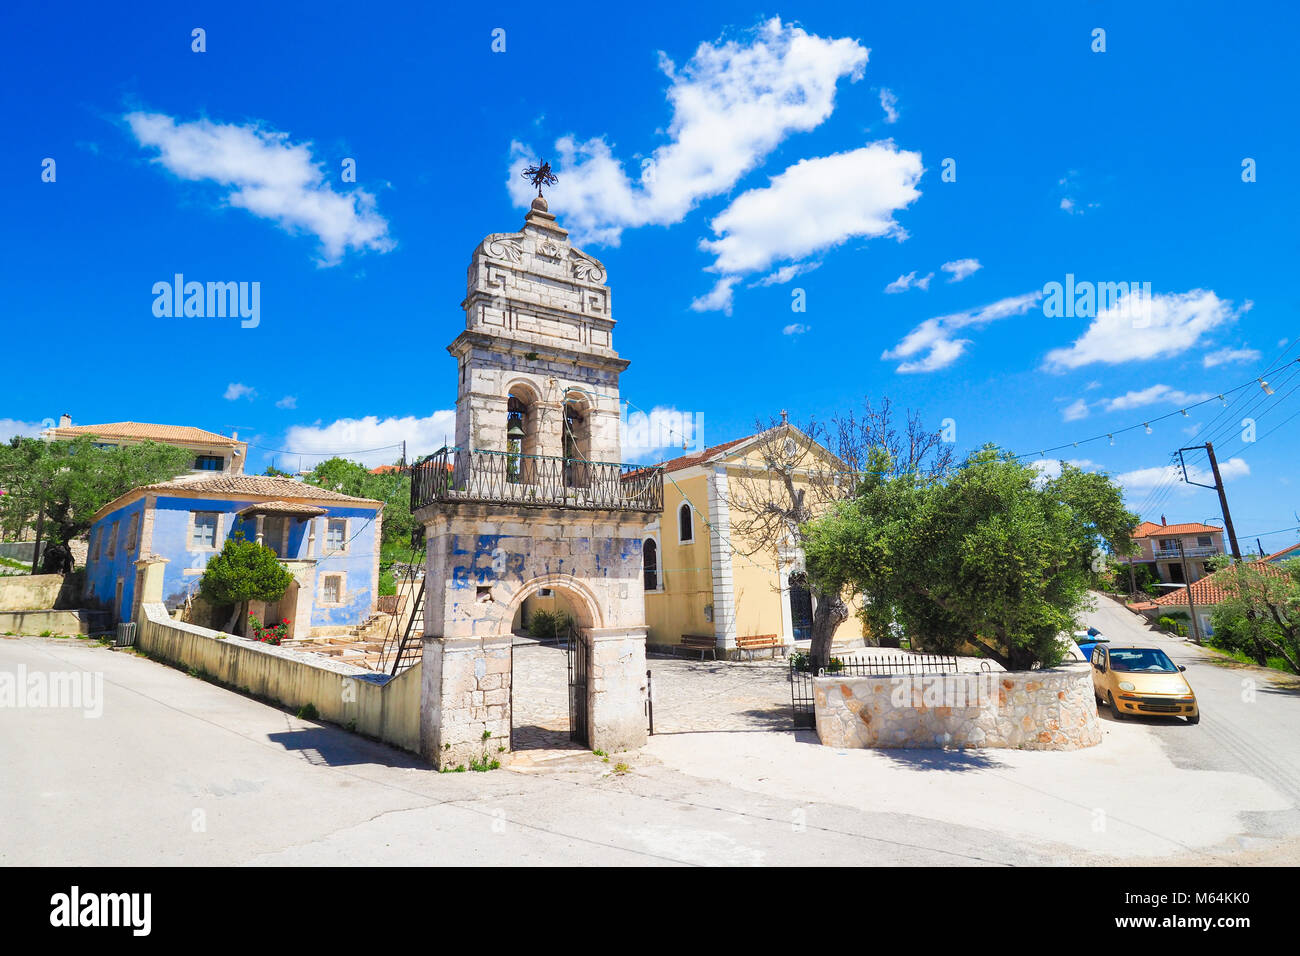 Old church in traditional greek village on the island of Zakynthos Stock Photo